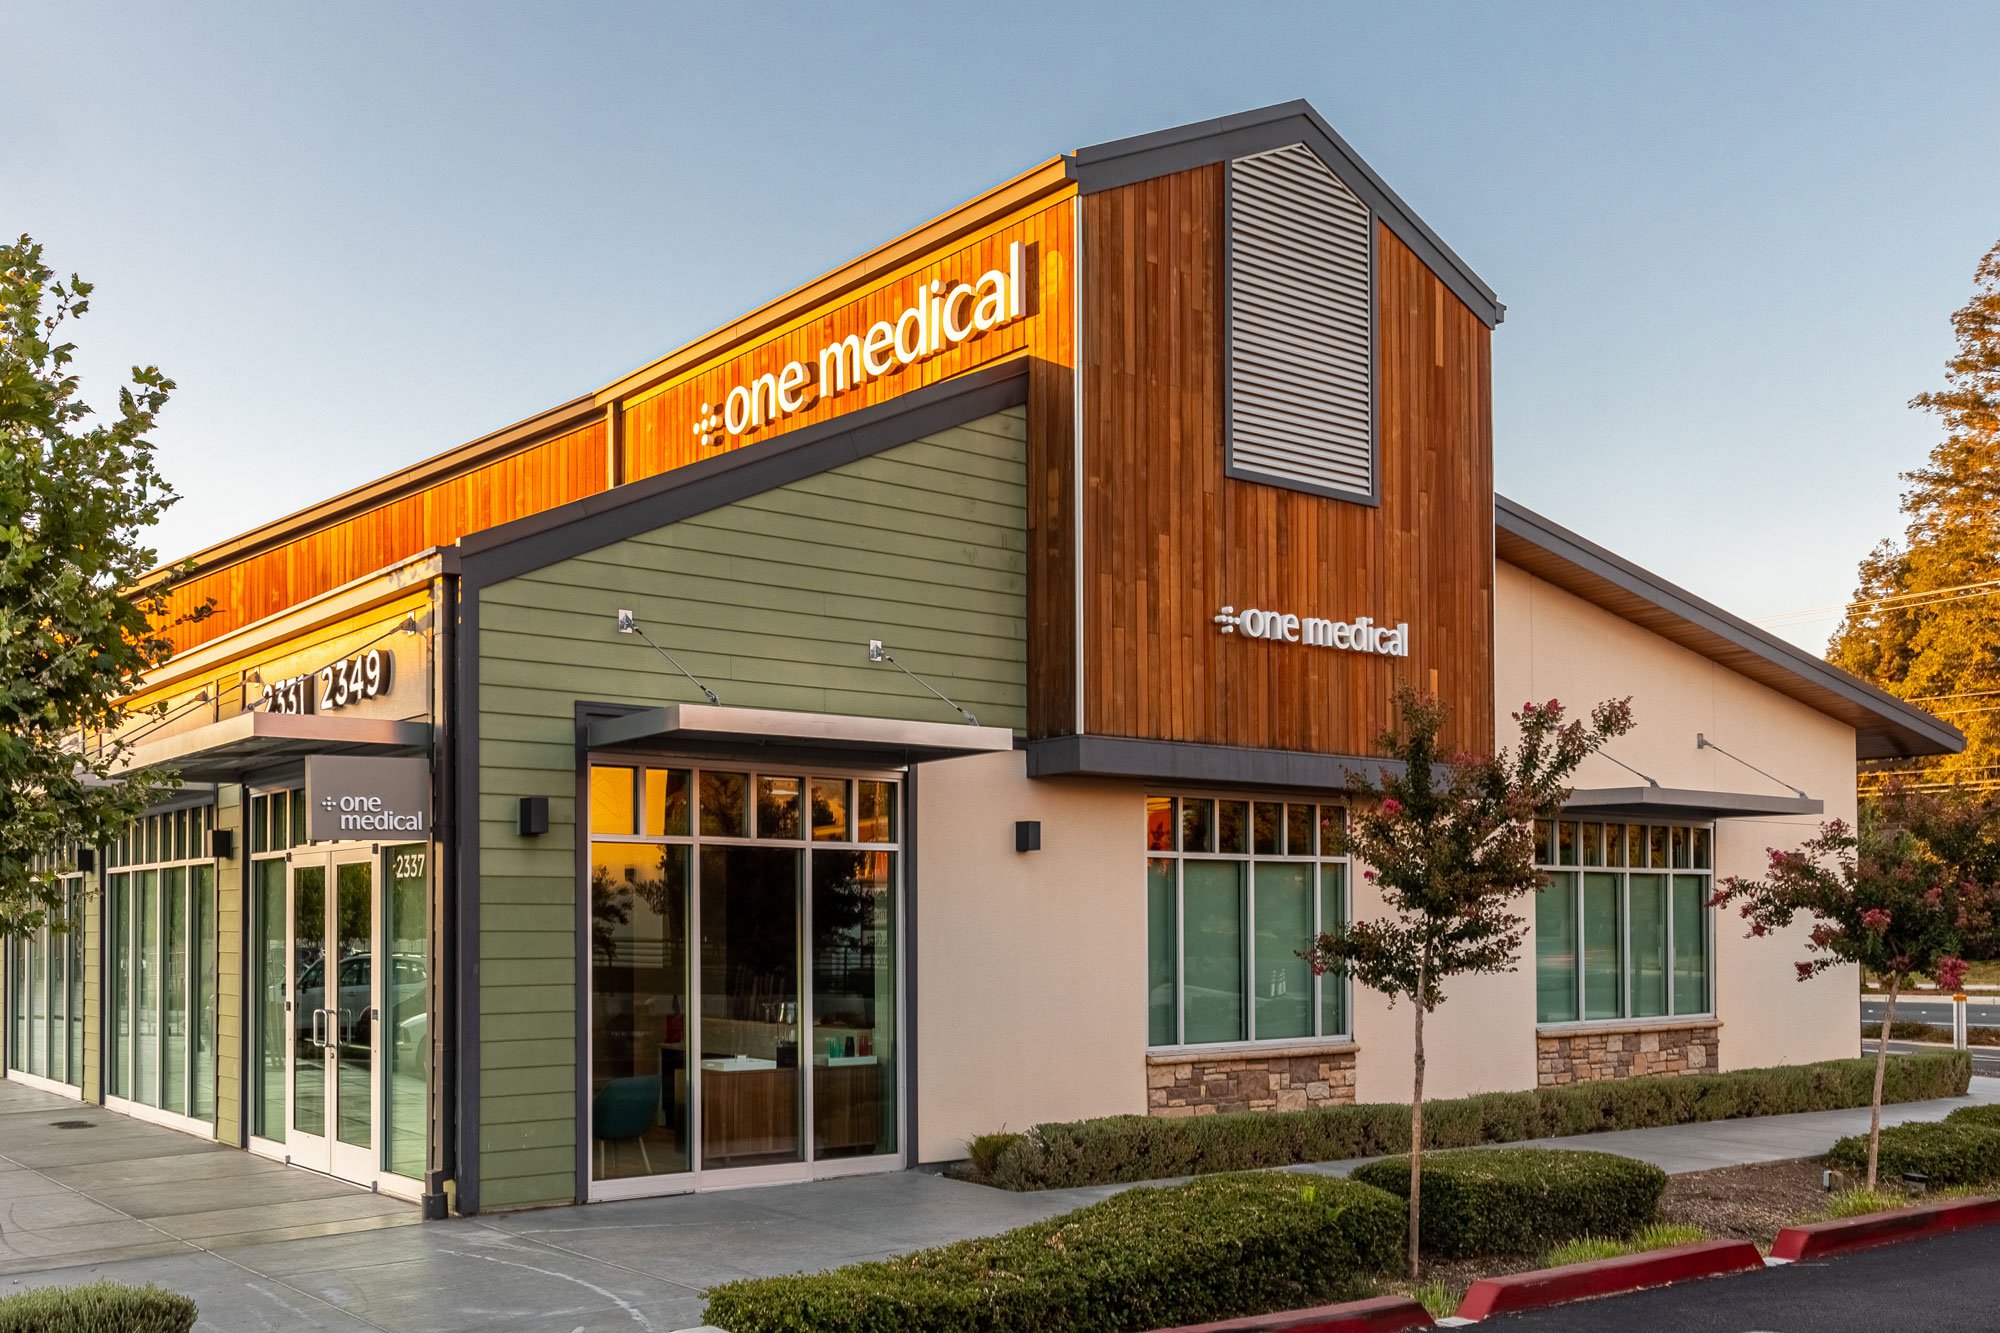 Photo of the outside of the One Medical Walnut Creek office